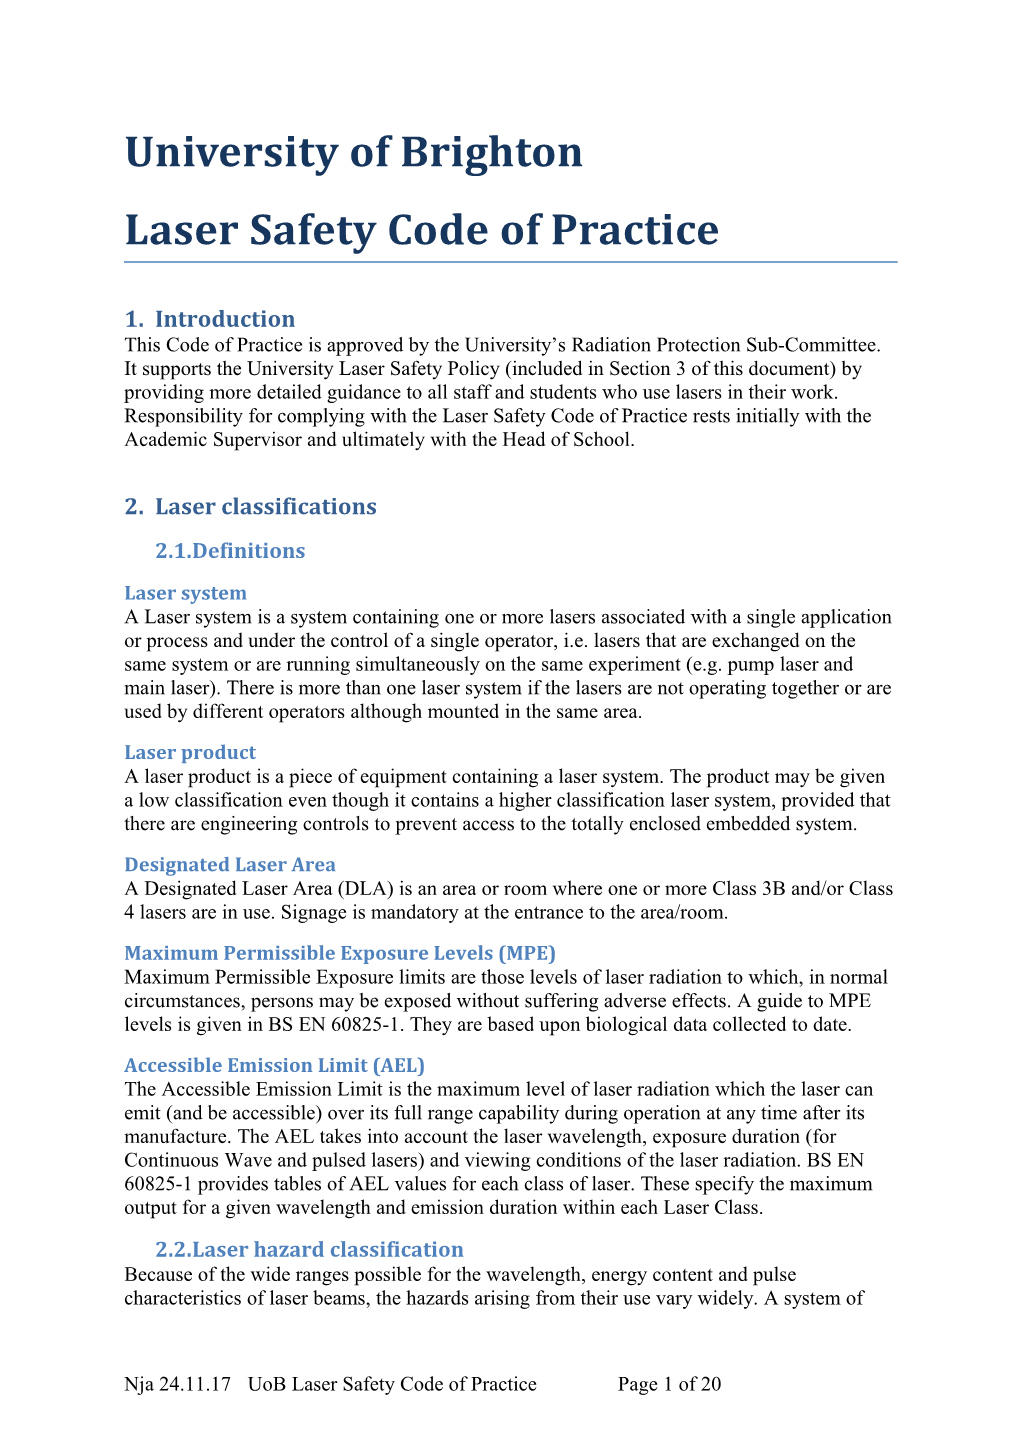 Laser Safety Code of Practice